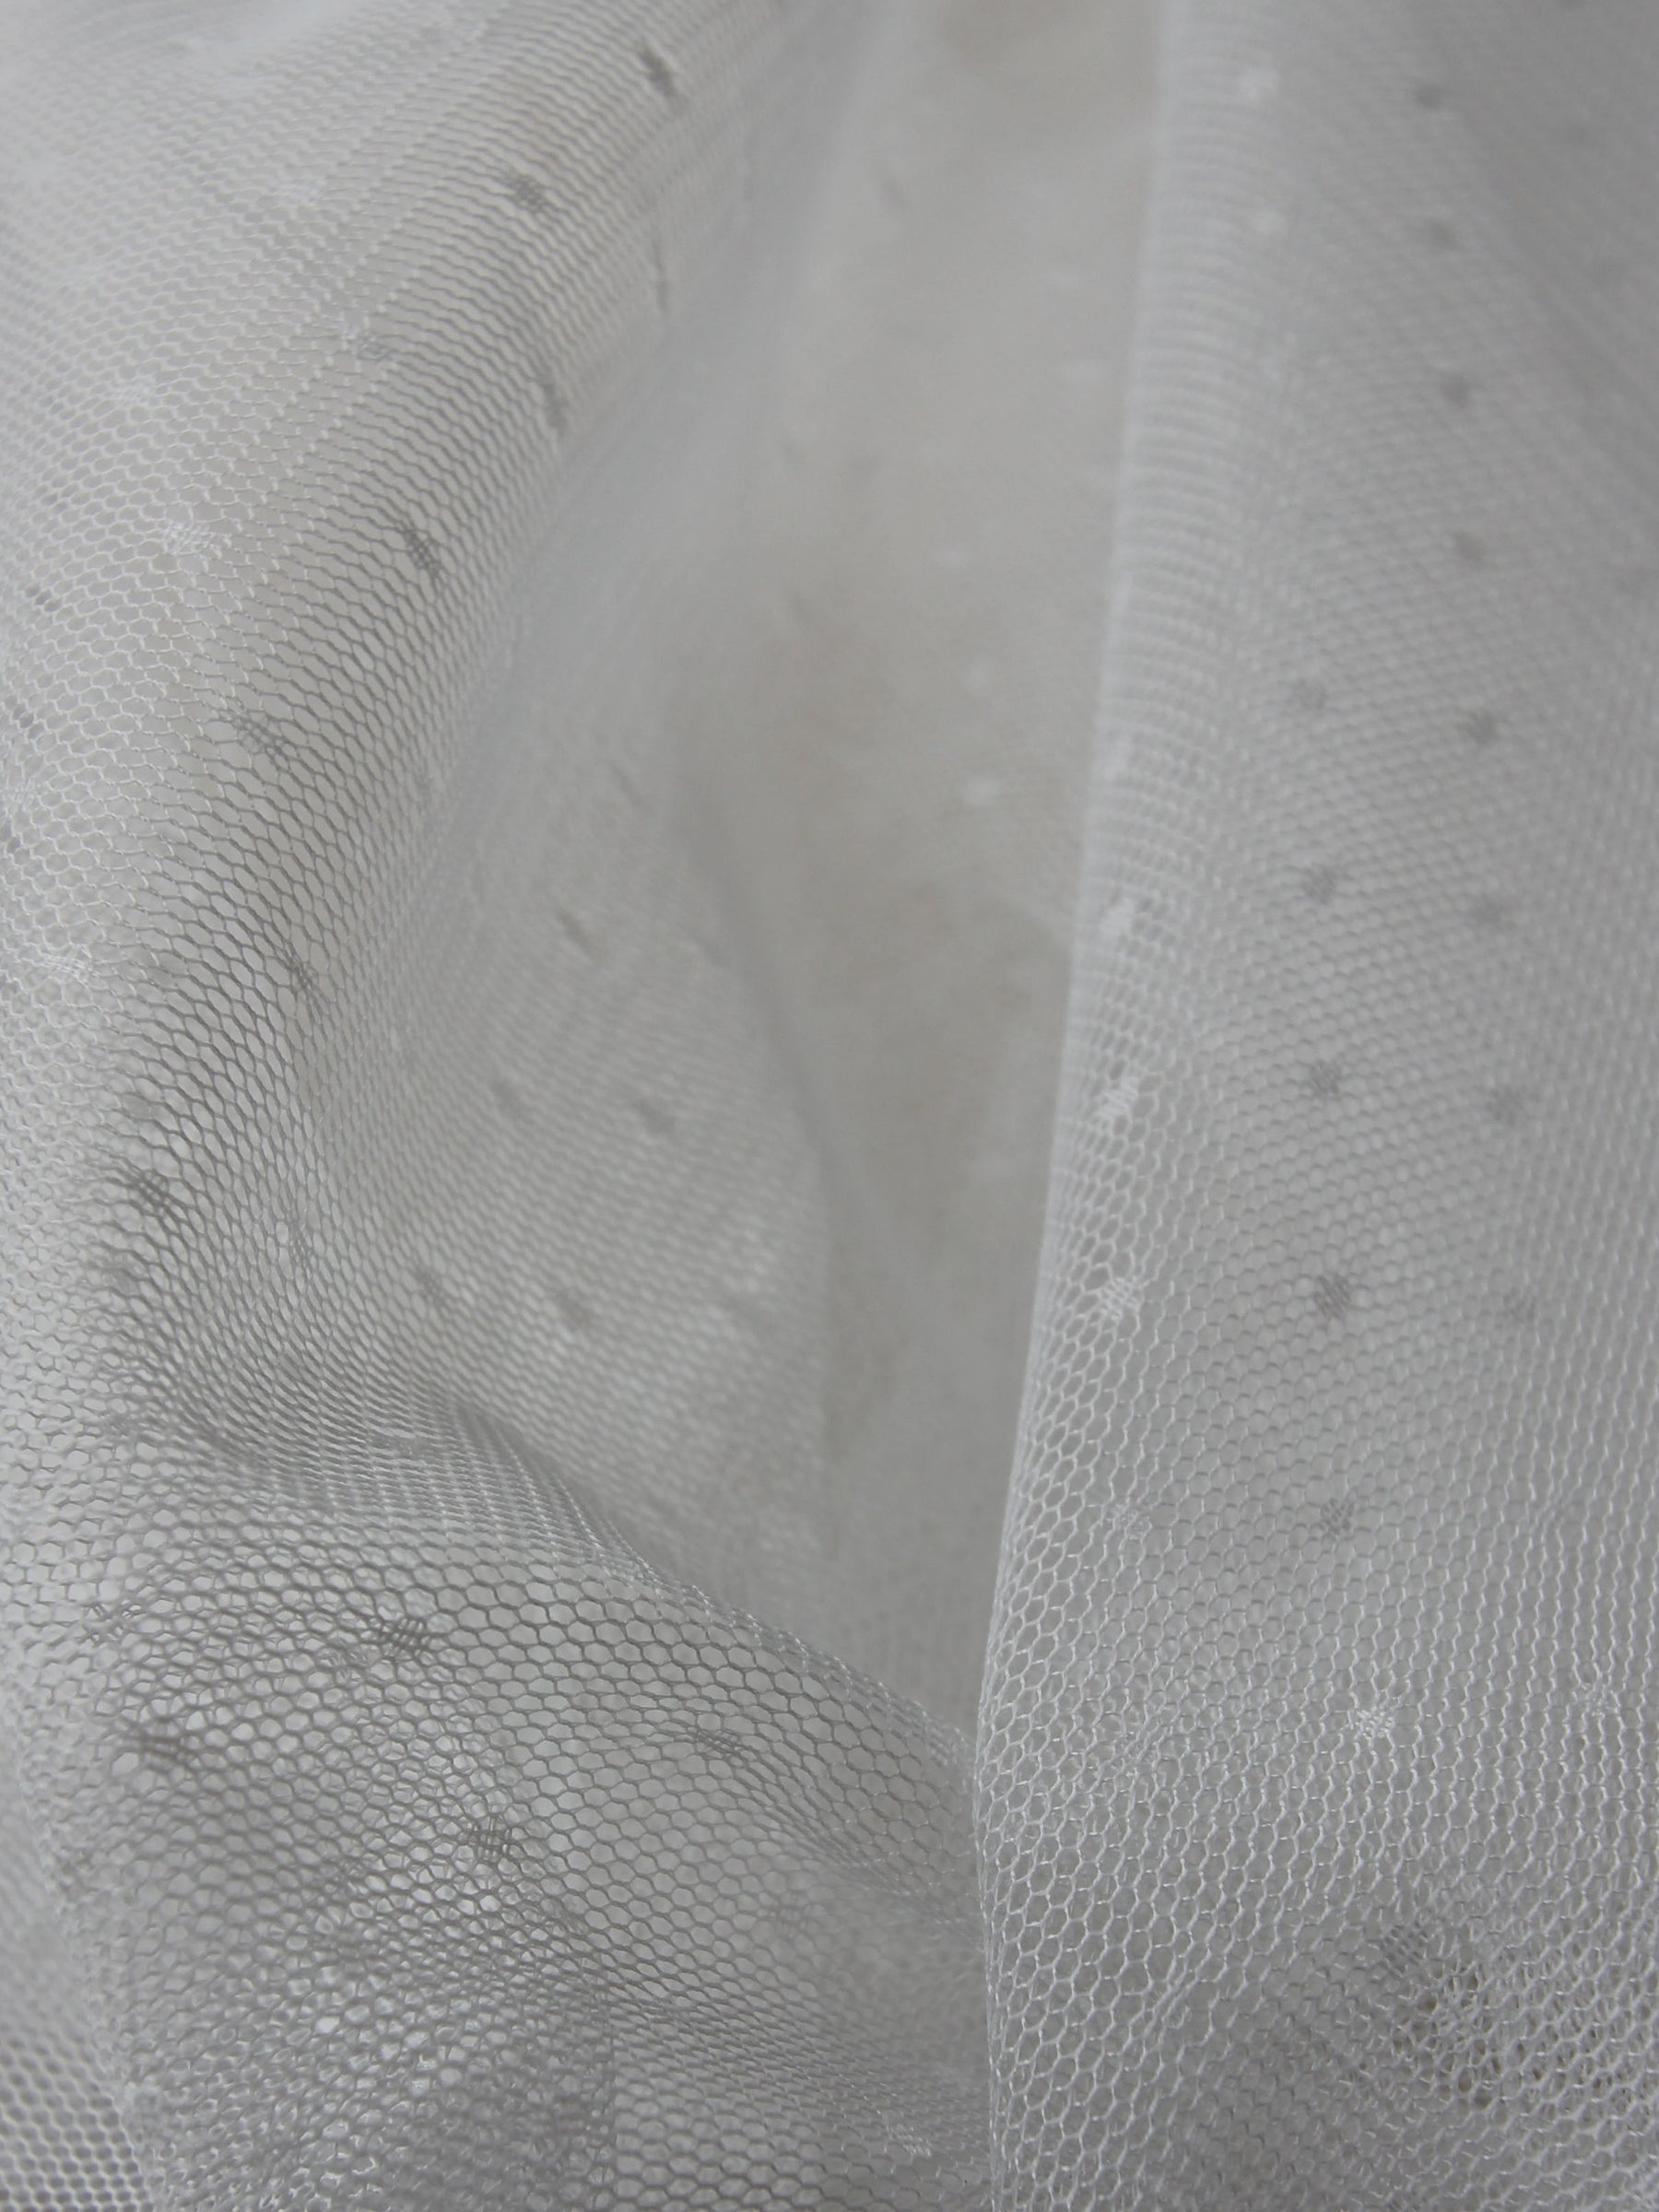 Ivory Small Spot Tulle - Pepper